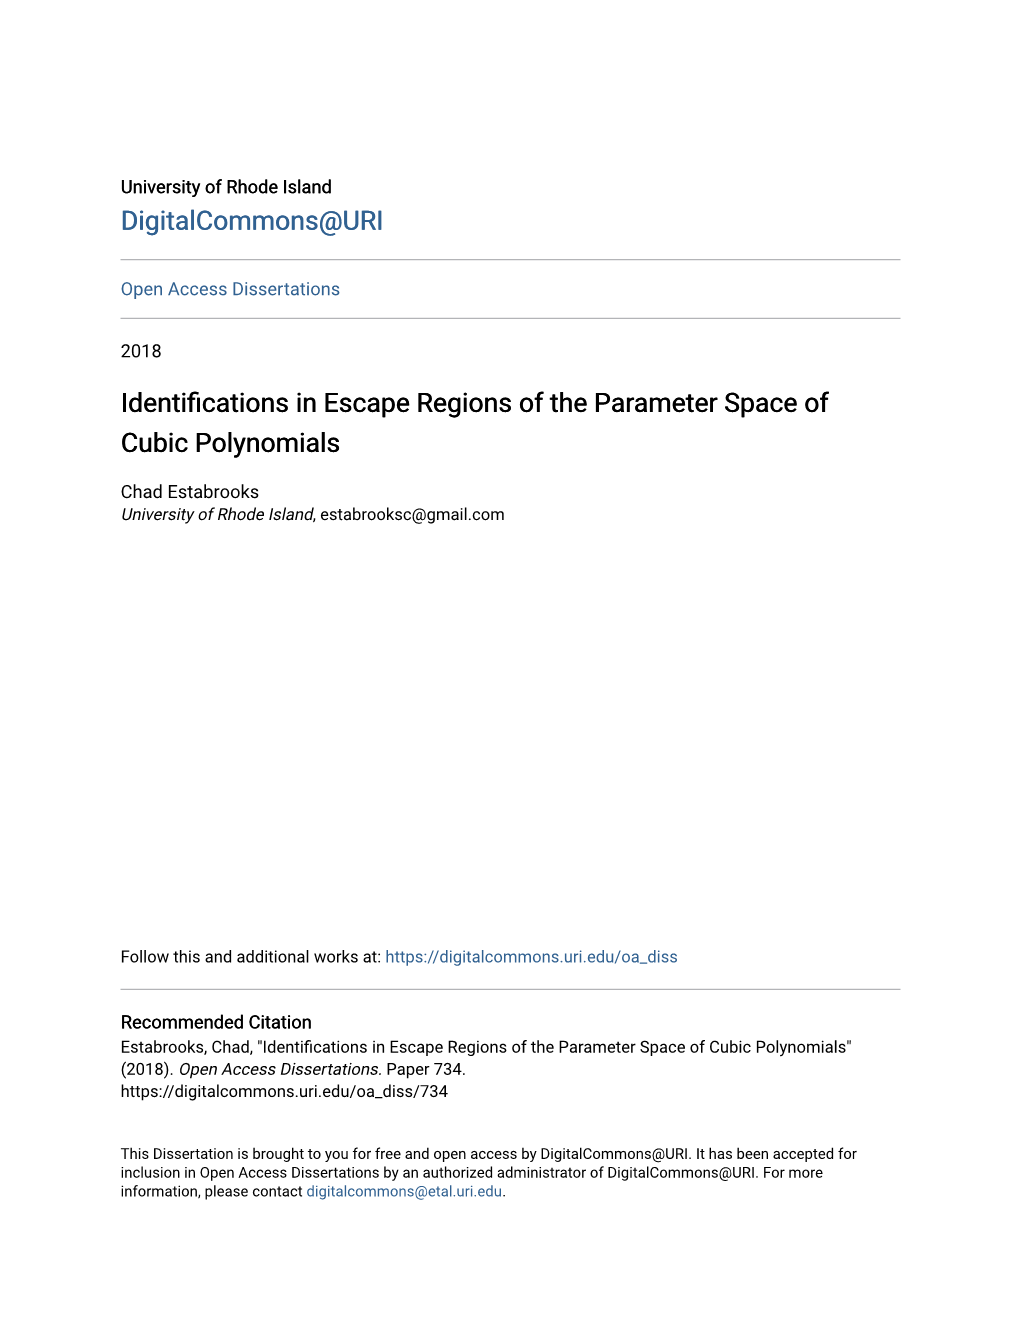 Identifications in Escape Regions of the Parameter Space of Cubic